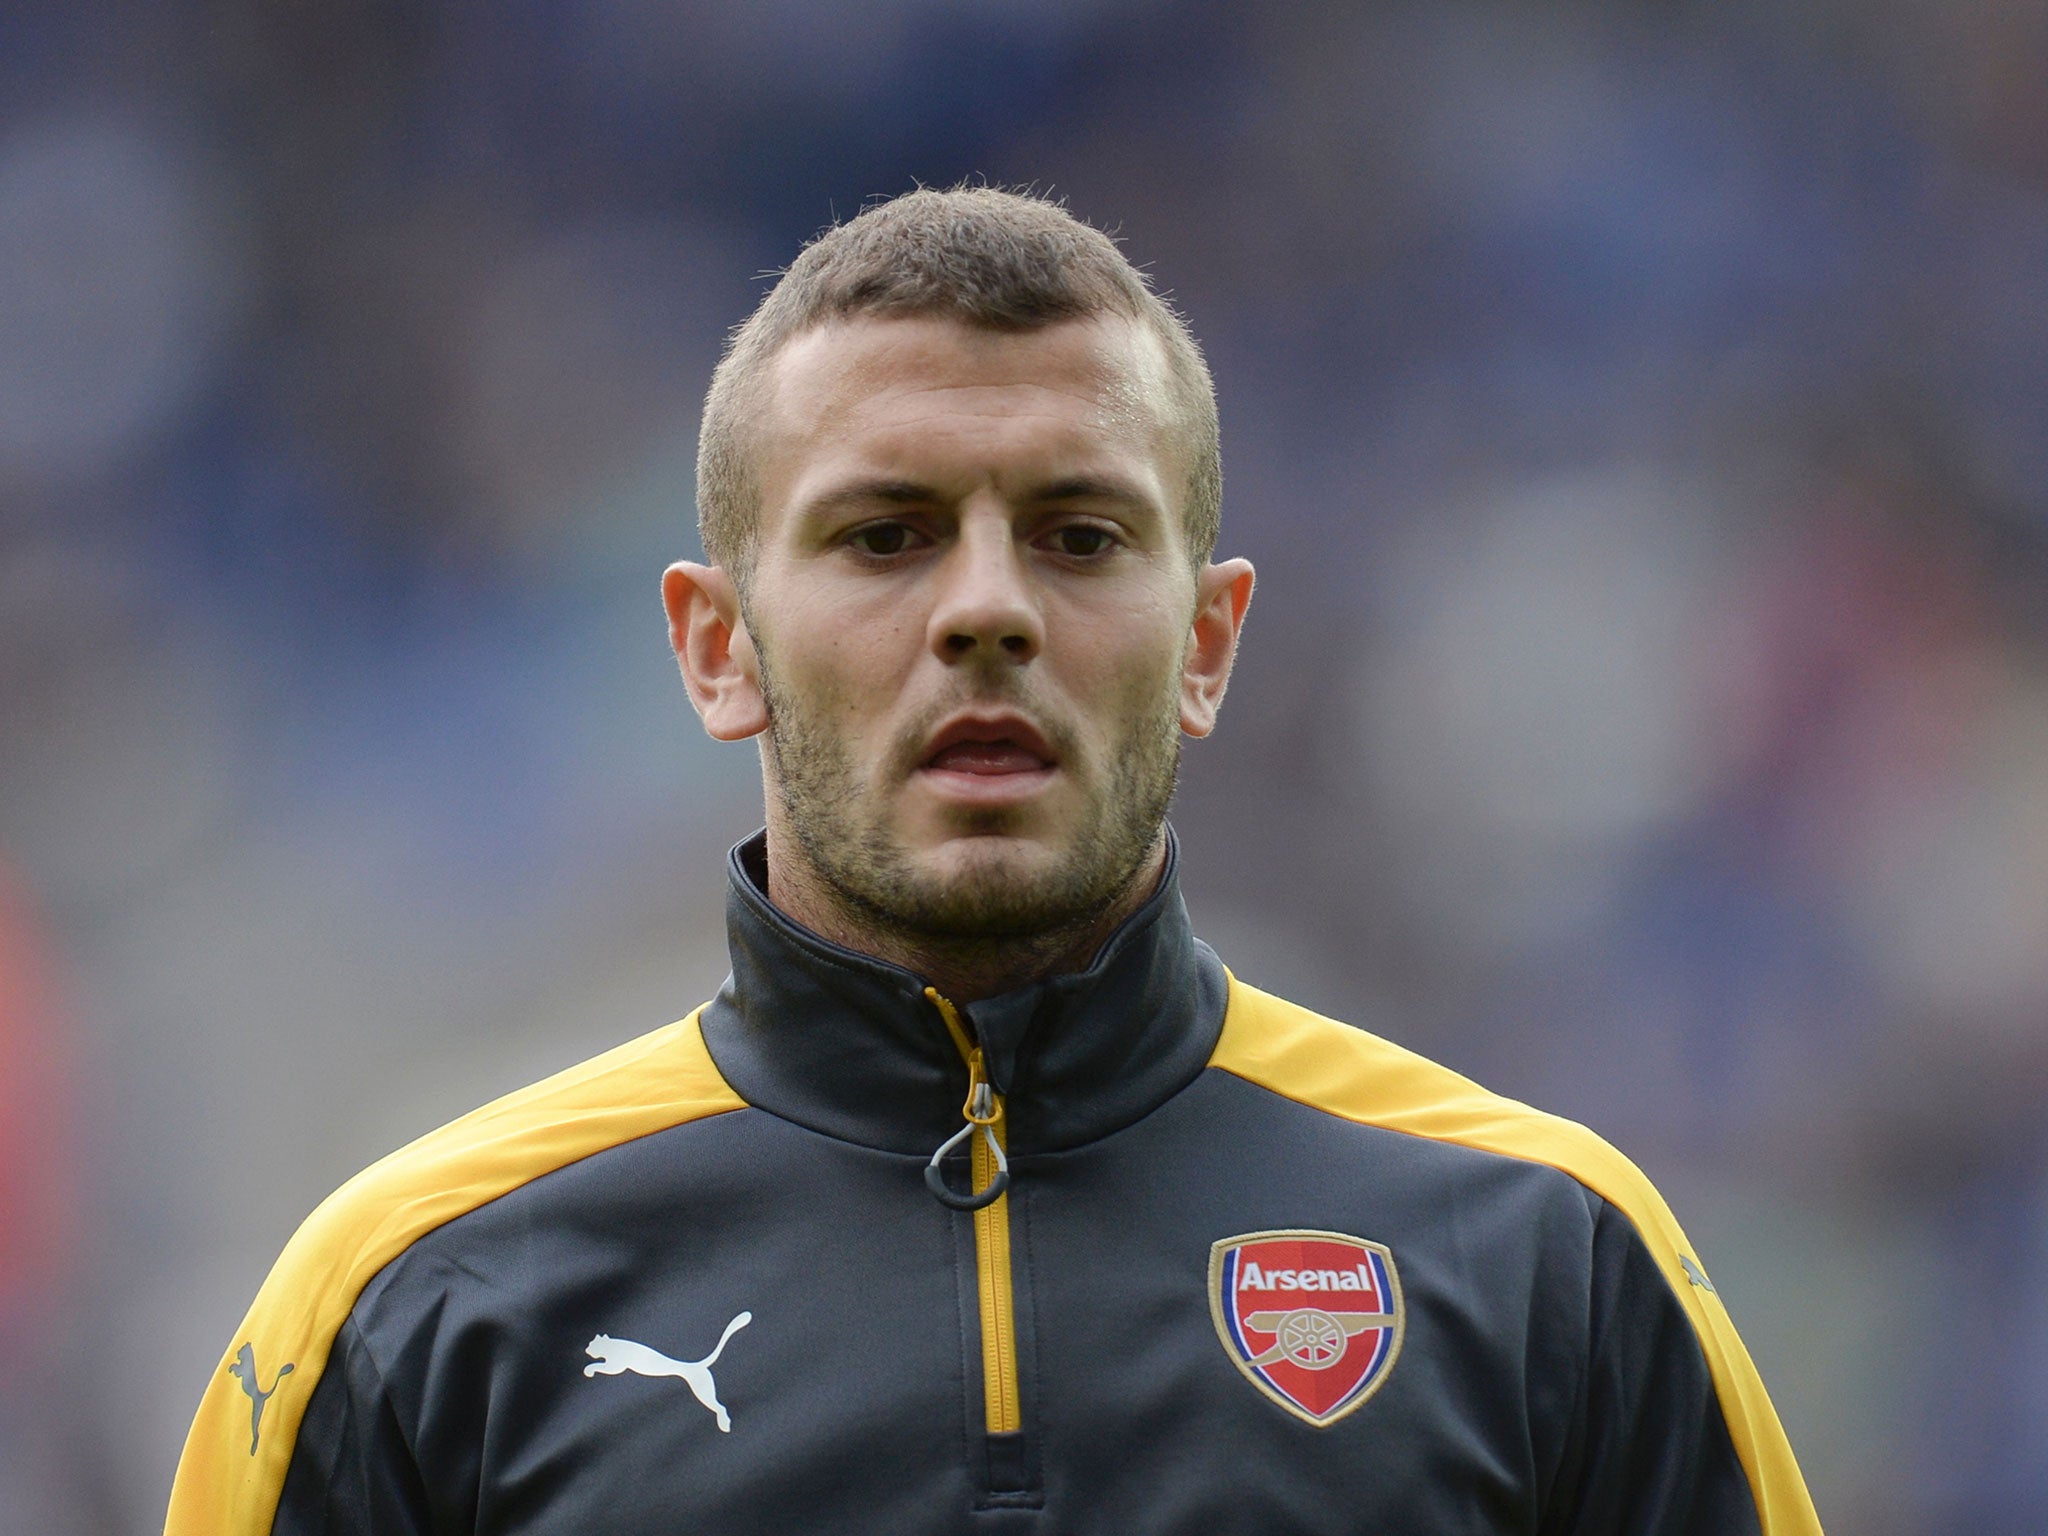 Jack Wilshere's Arsenal future remains unclear